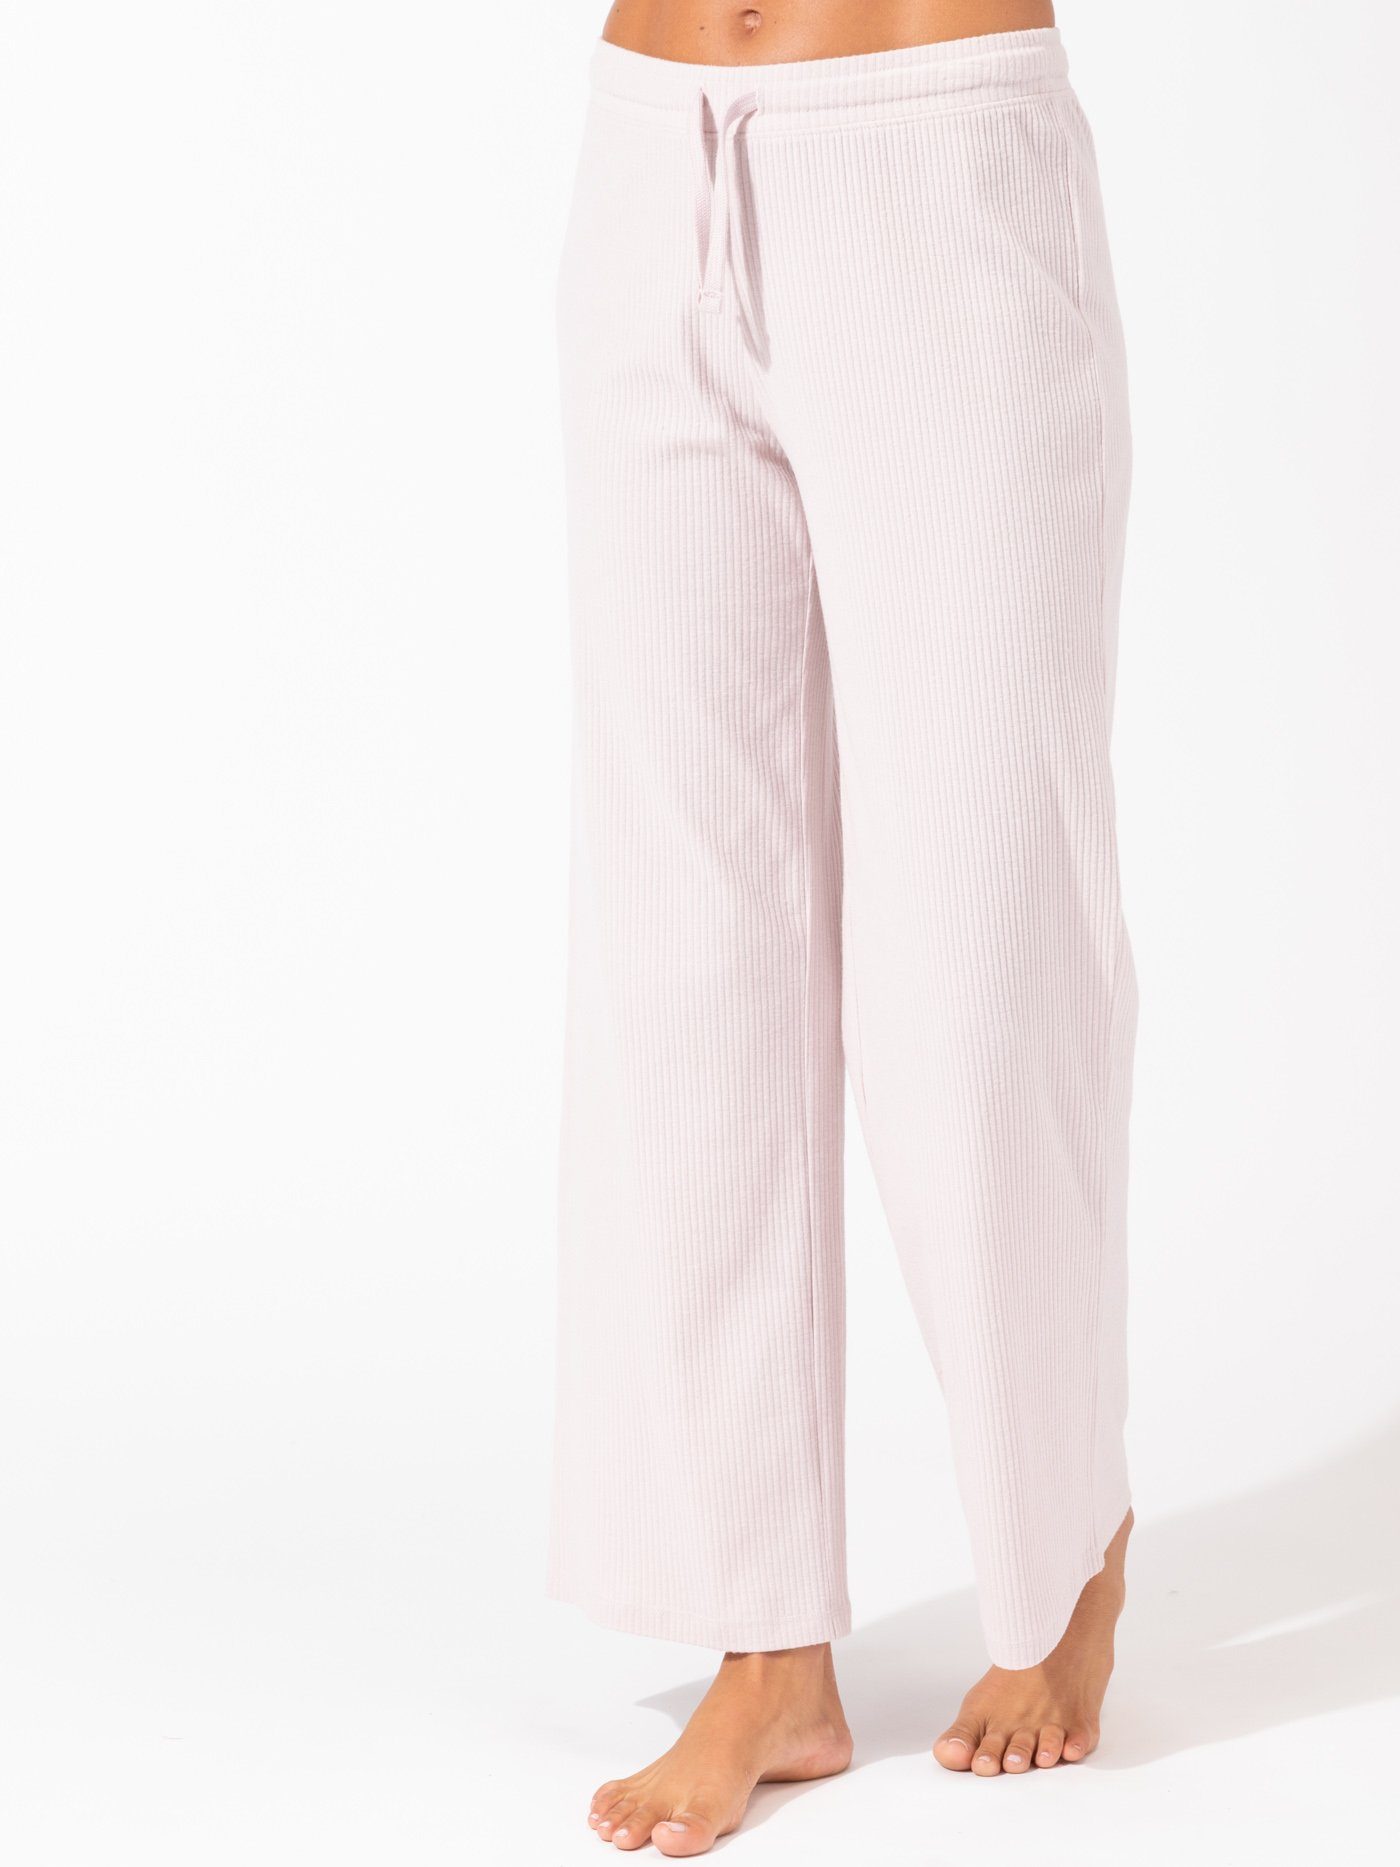 Cherie Wide-Leg Rib Pant Threads 4 Thought 